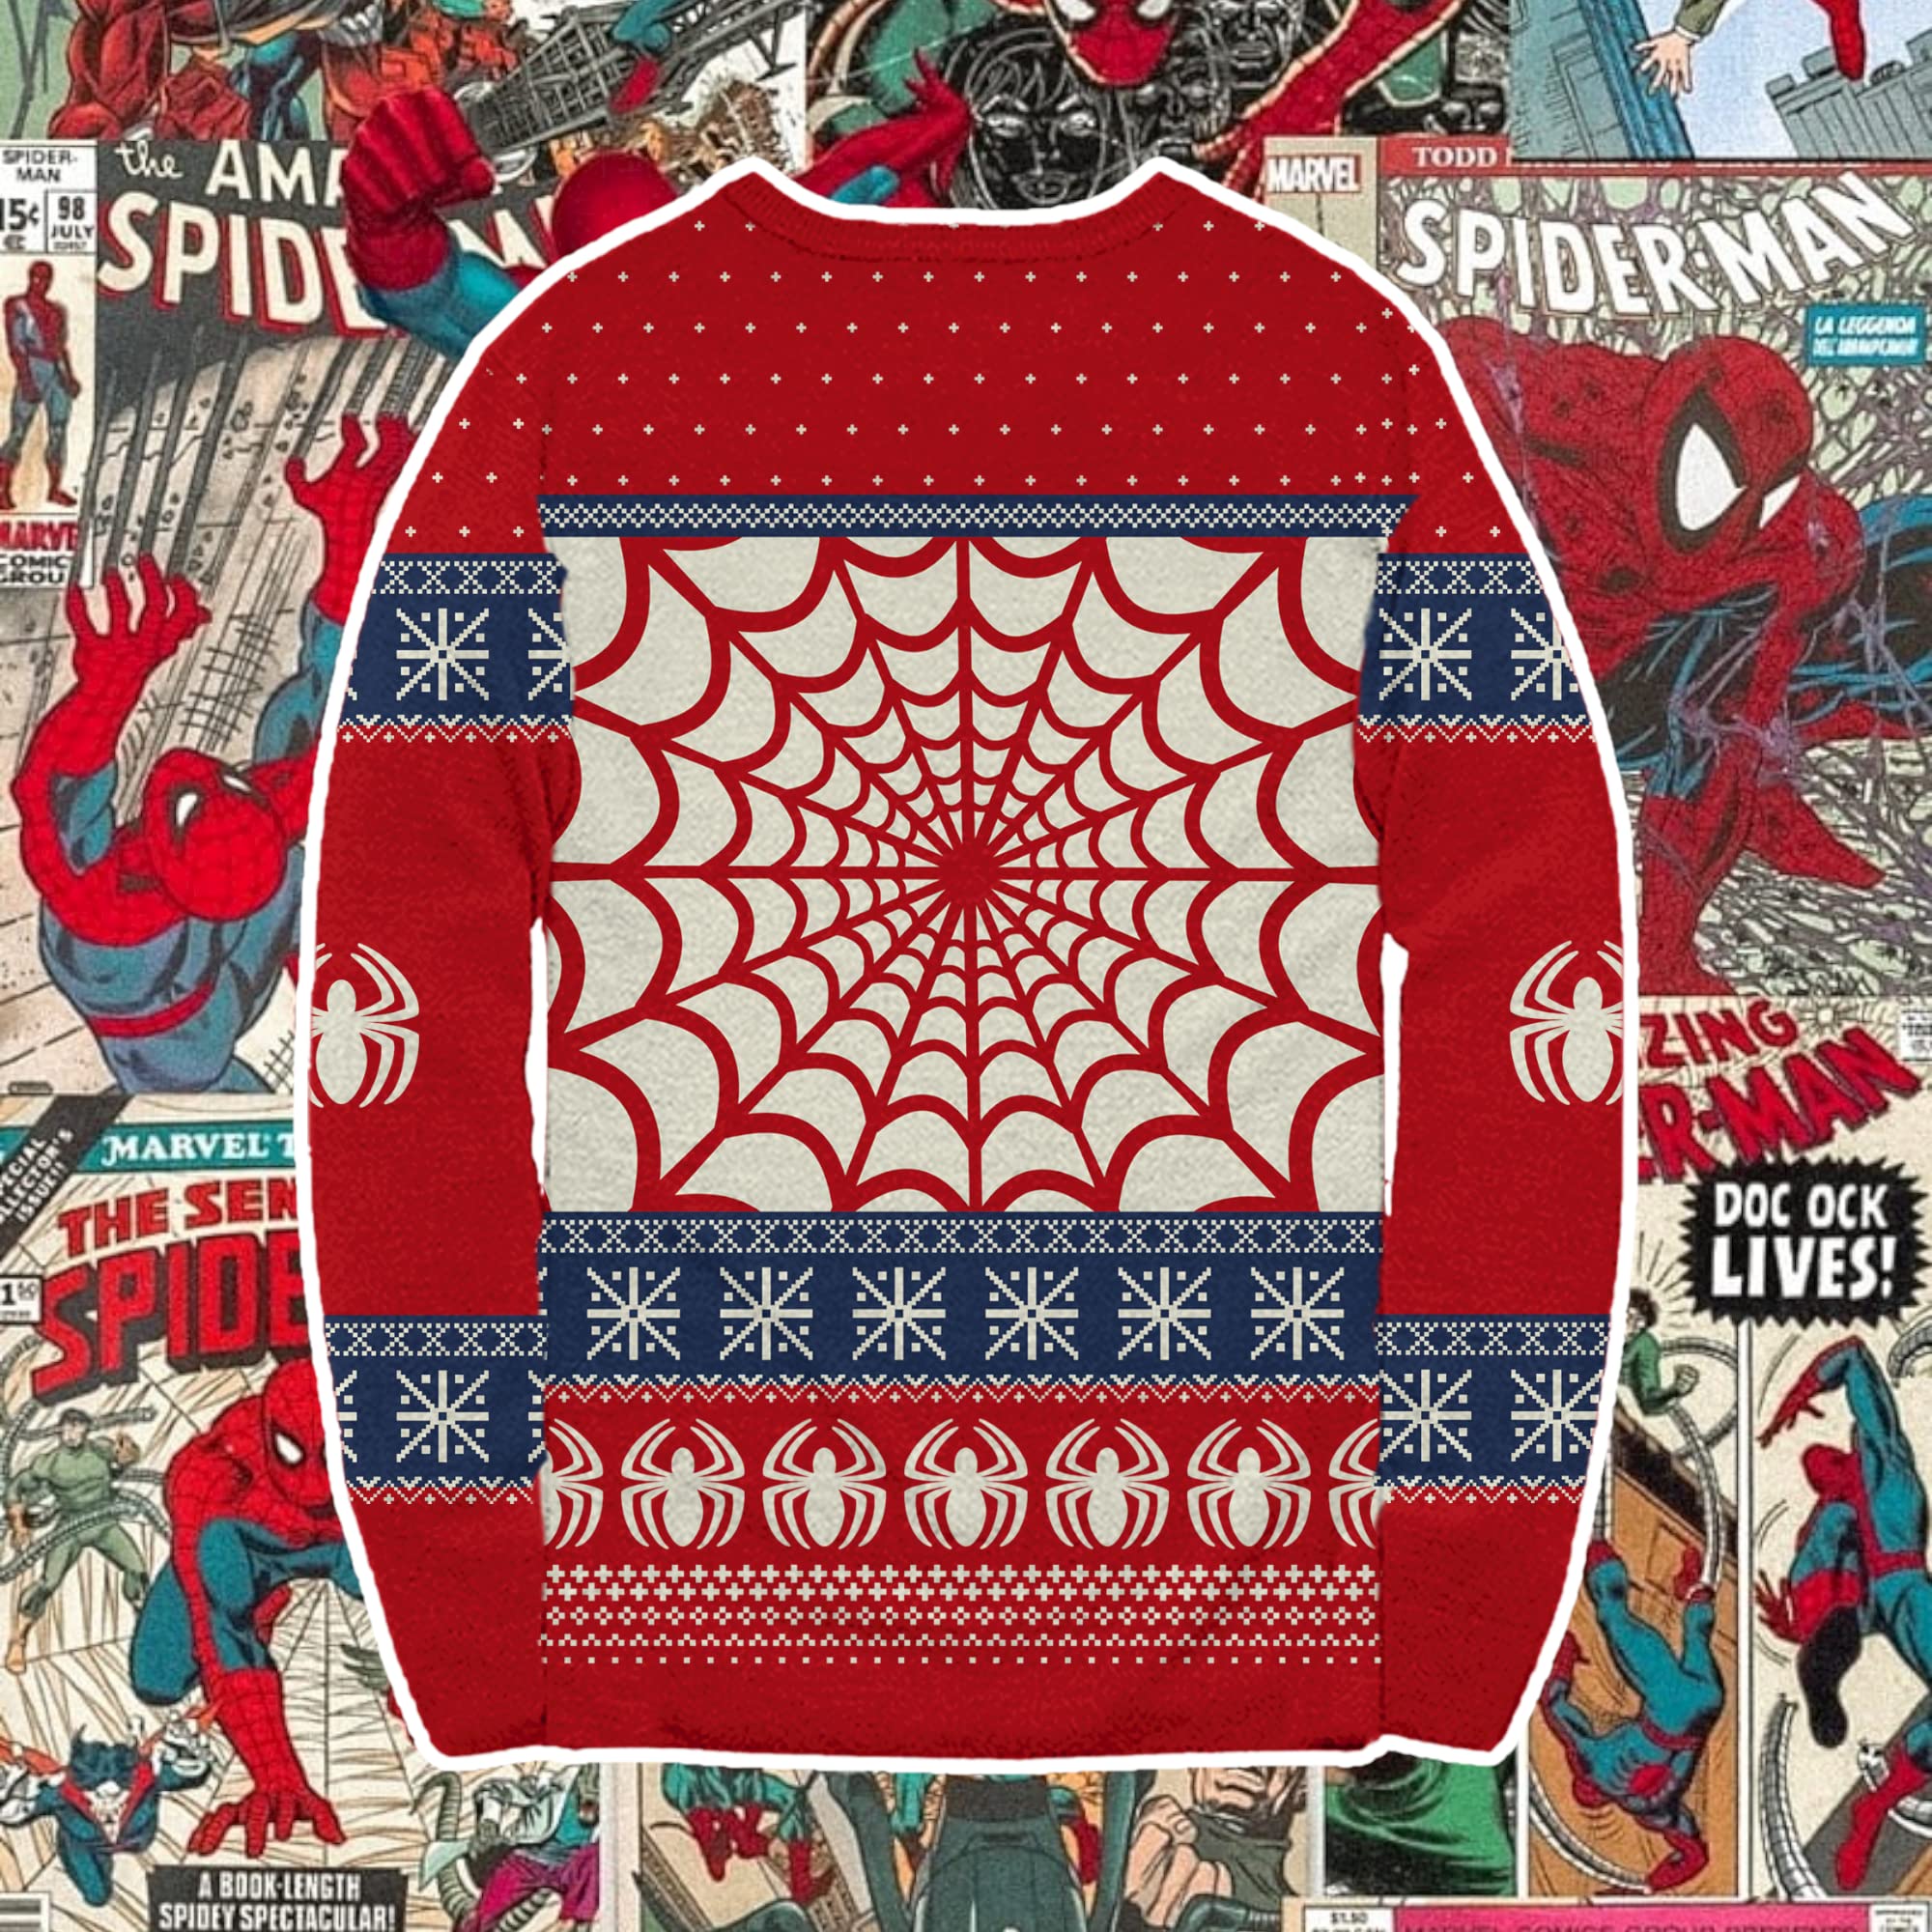 Marvel Spider- Man Symbol and Webs Offcially Licesned Adult Knit Holiday Ugly Christmas Sweater